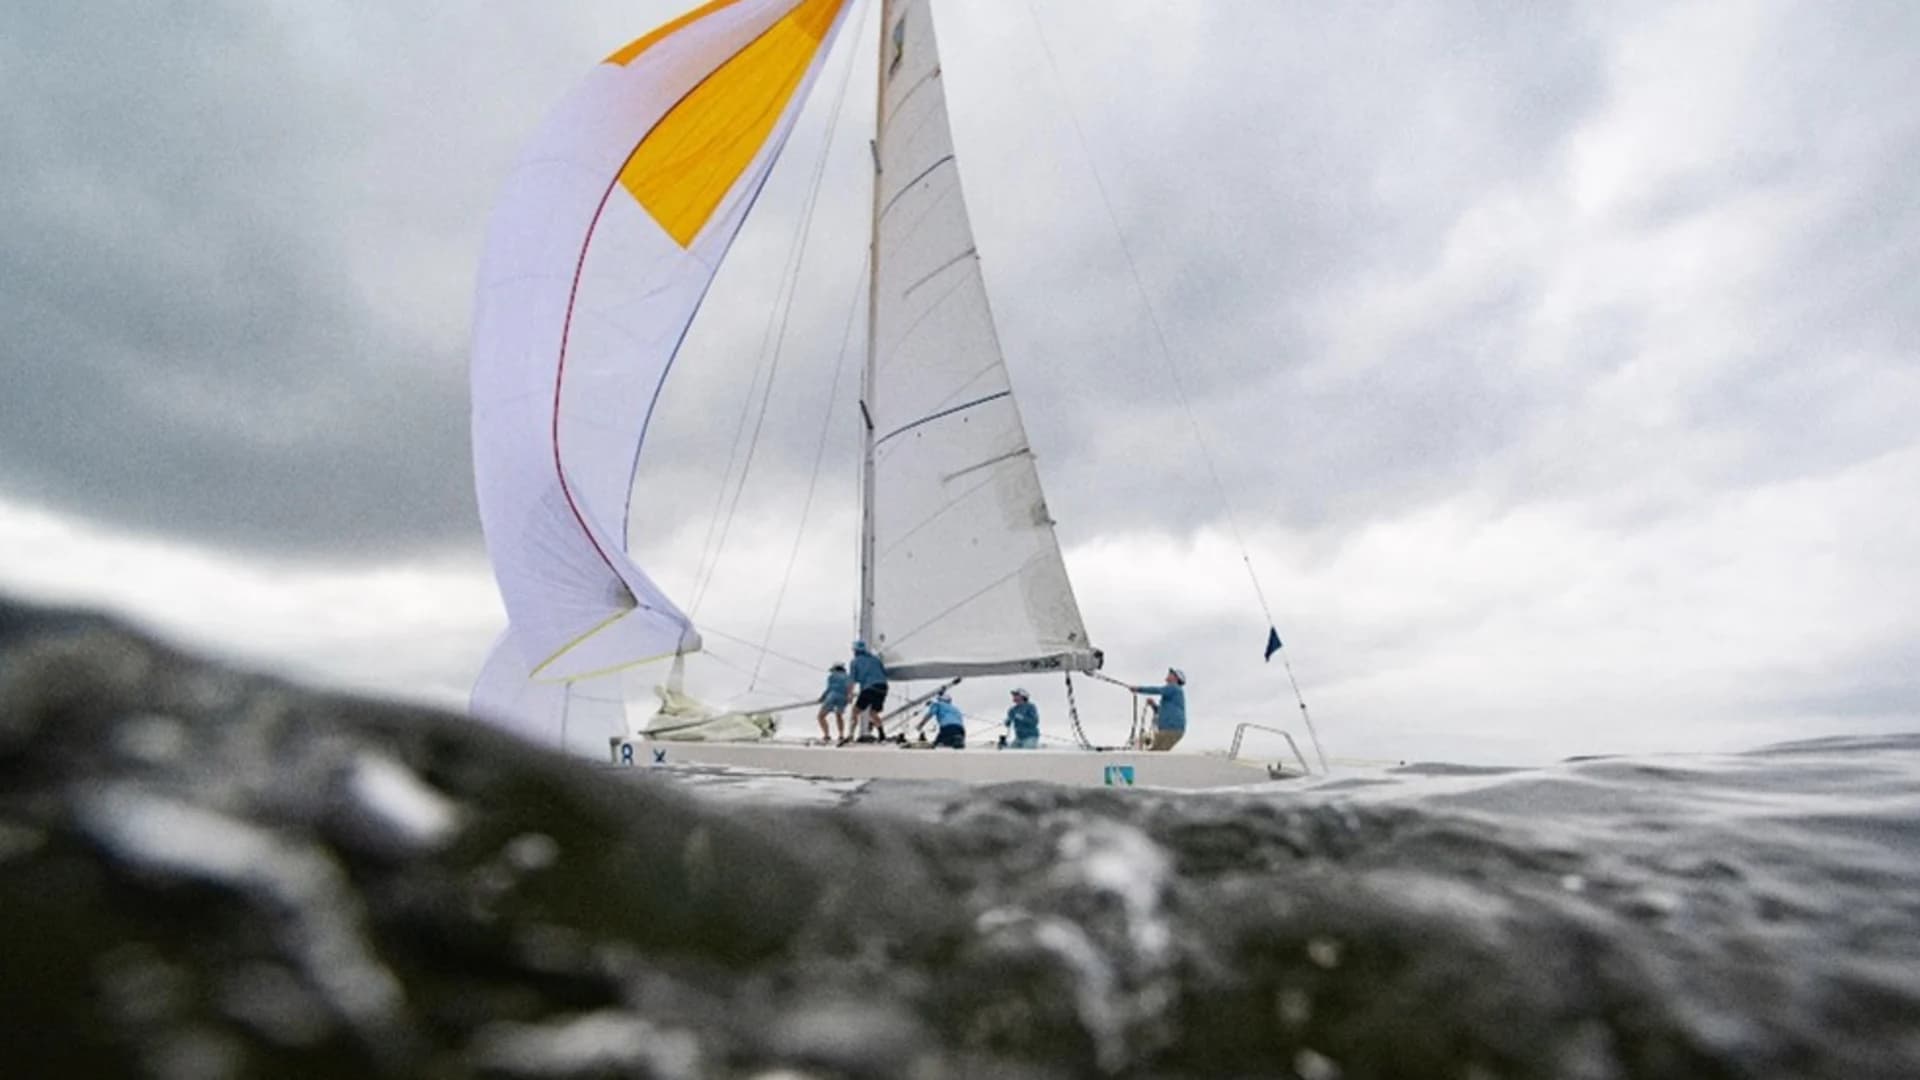 Oakcliff Sailing to host Water Lovers' Mixer for residents with passion for marine activities